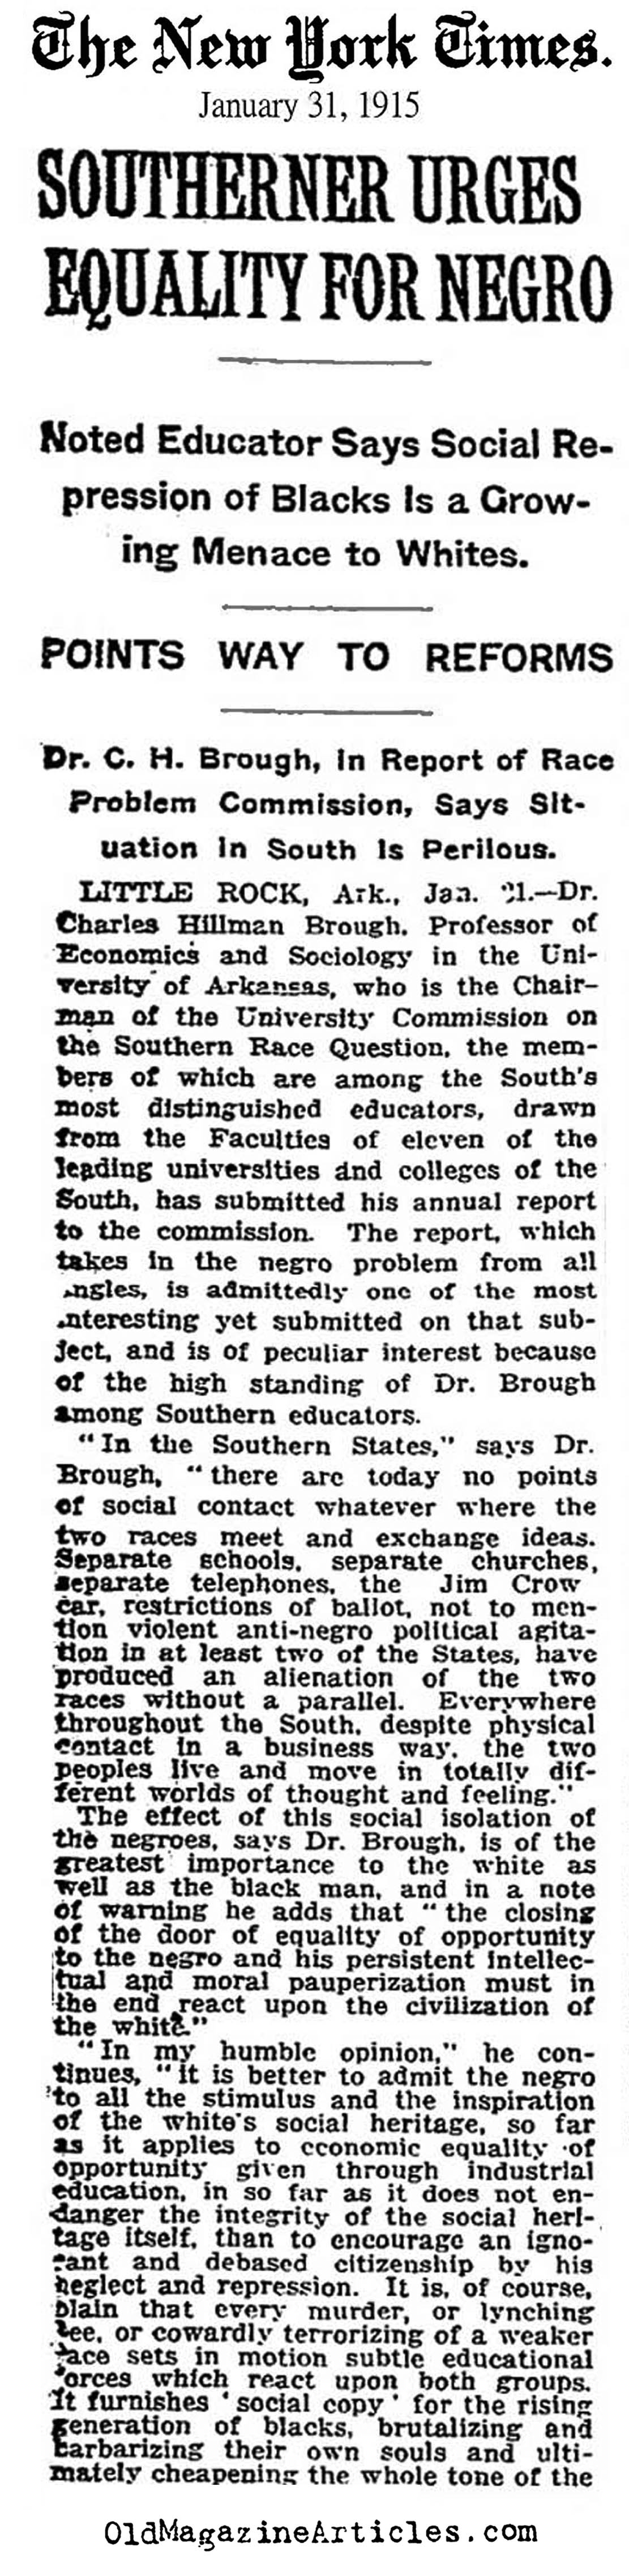 Brough Called Out for Racial Parity (New York Times, 1915) 